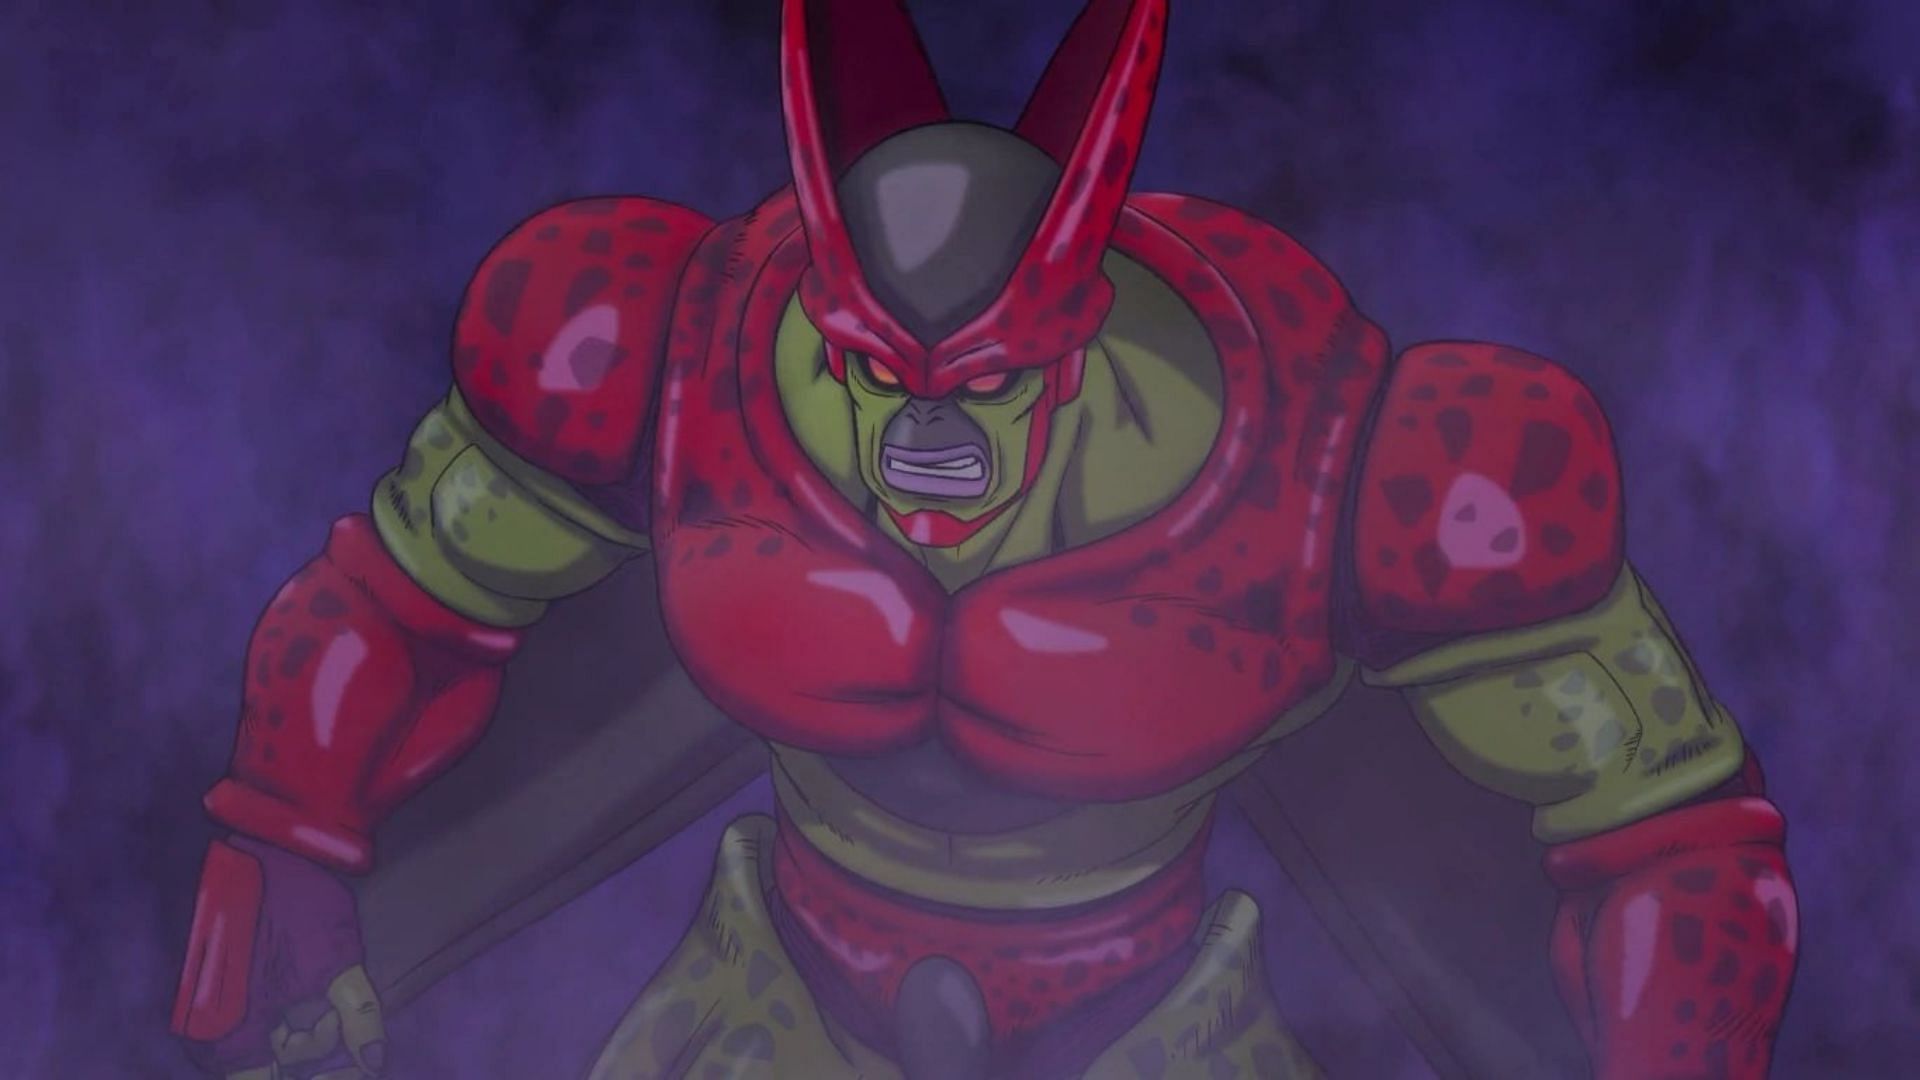 Cell Max (Image via Toei Animation)